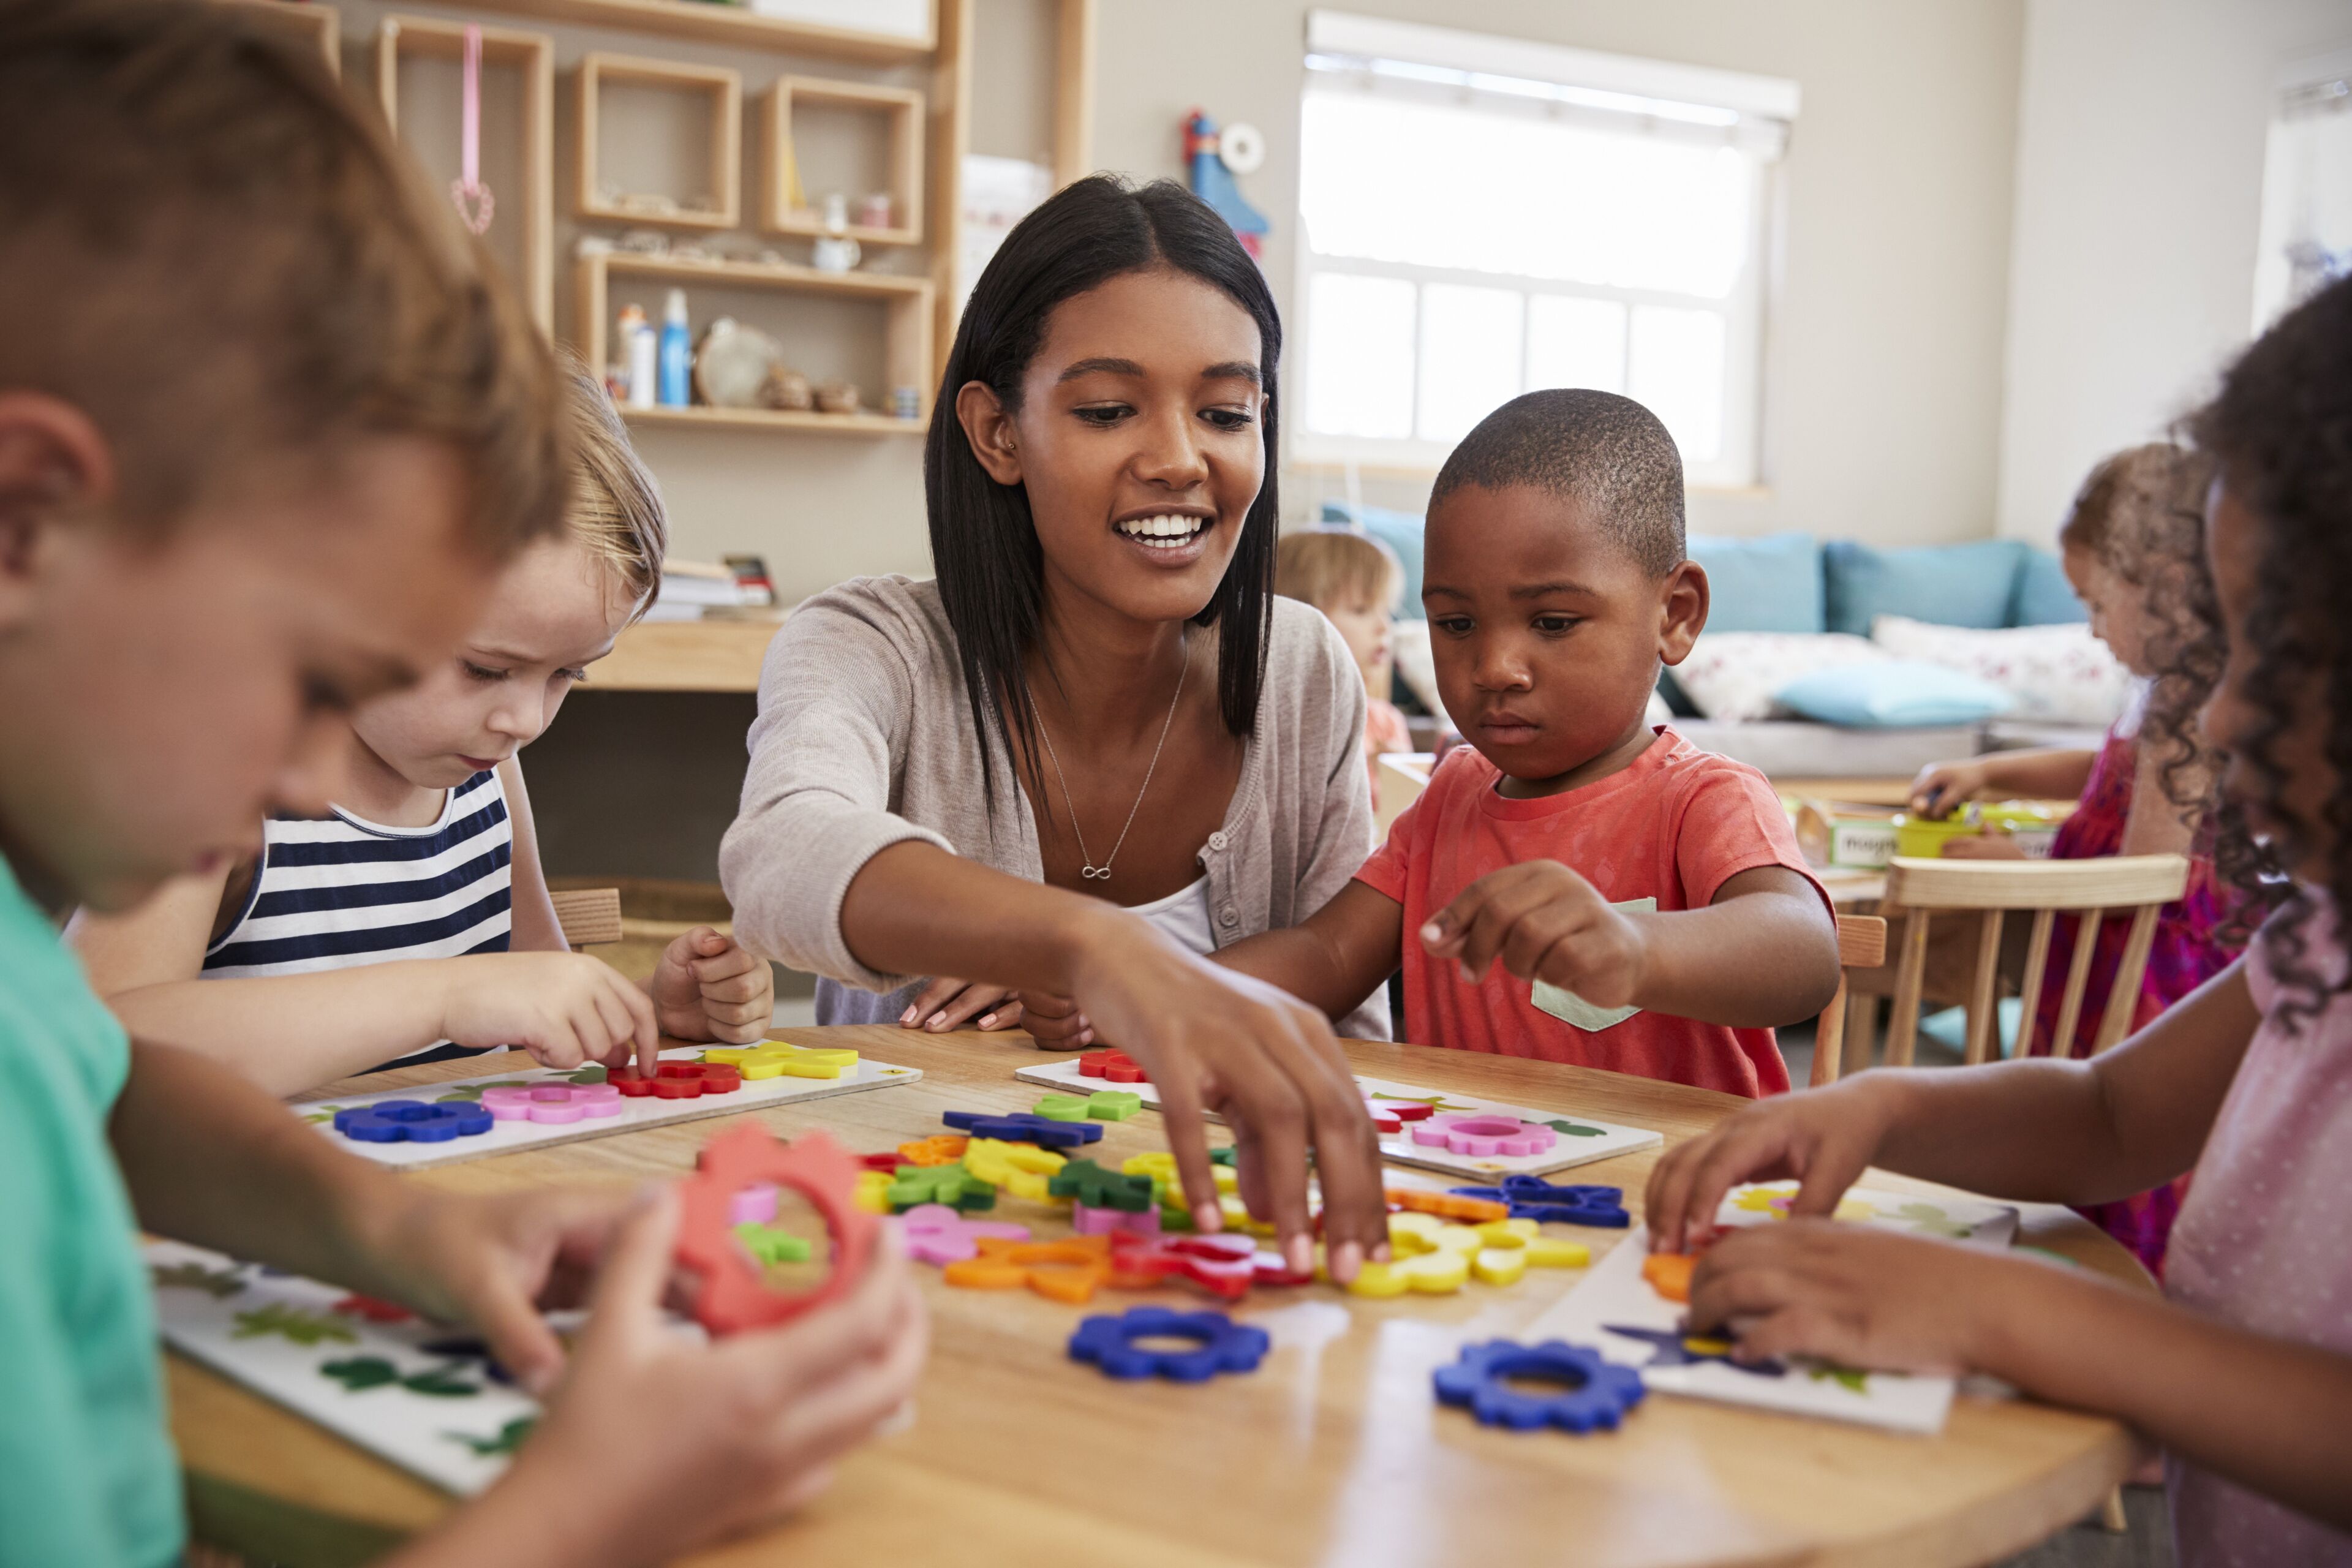 A teacher engages with young children at a table, guiding them through a playful lesson on shapes and colors using educational toys.